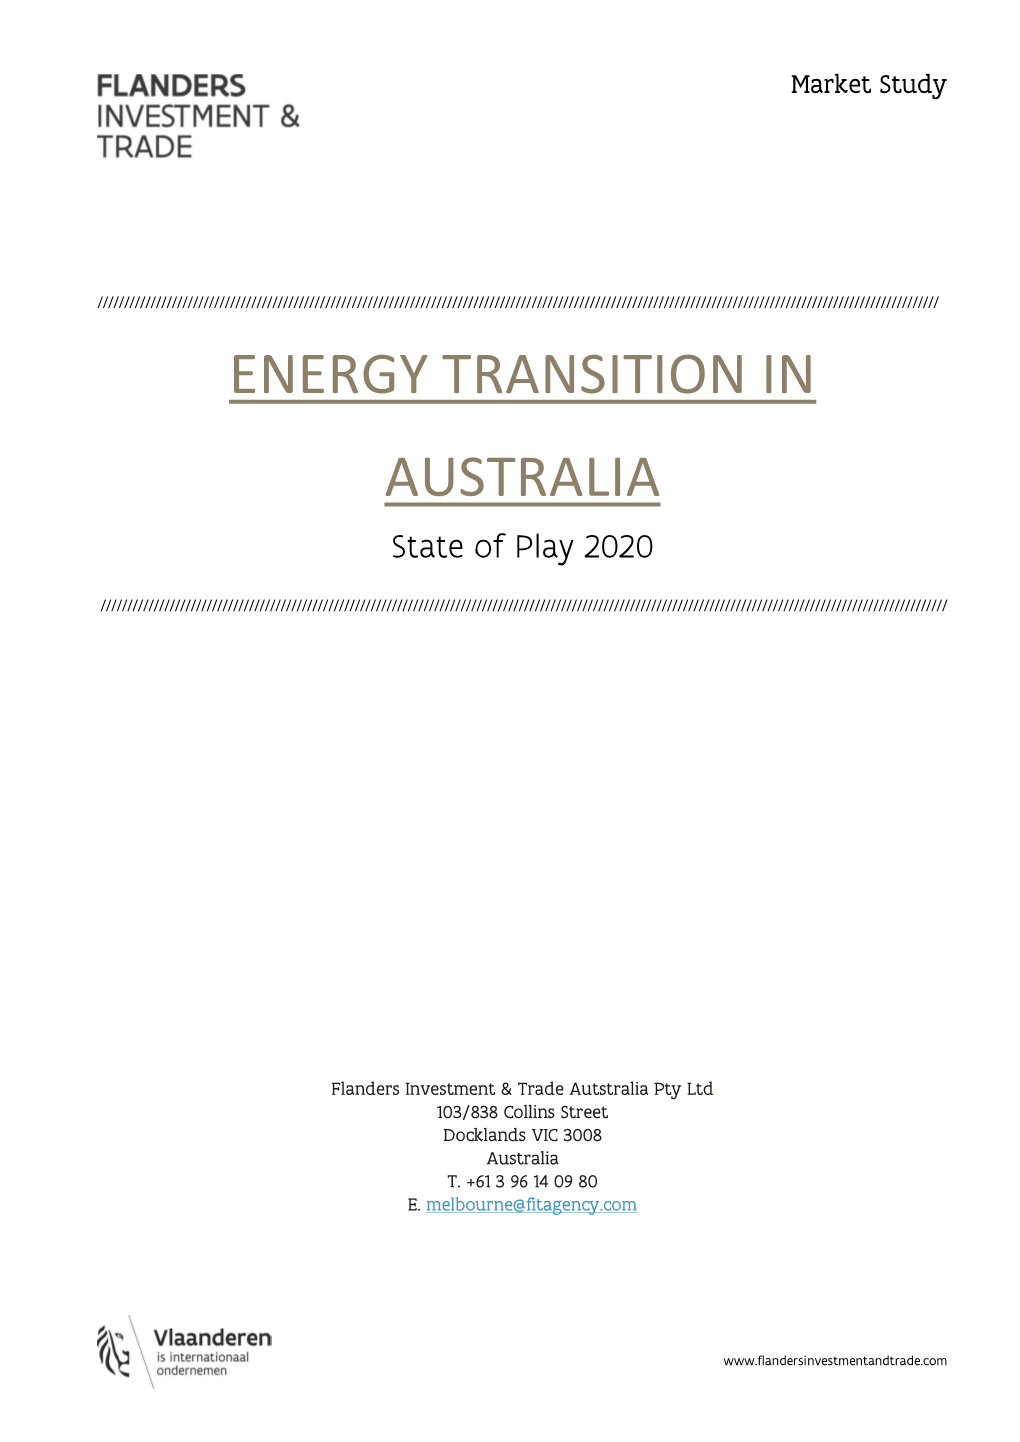 ENERGY TRANSITION in AUSTRALIA State of Play 2020